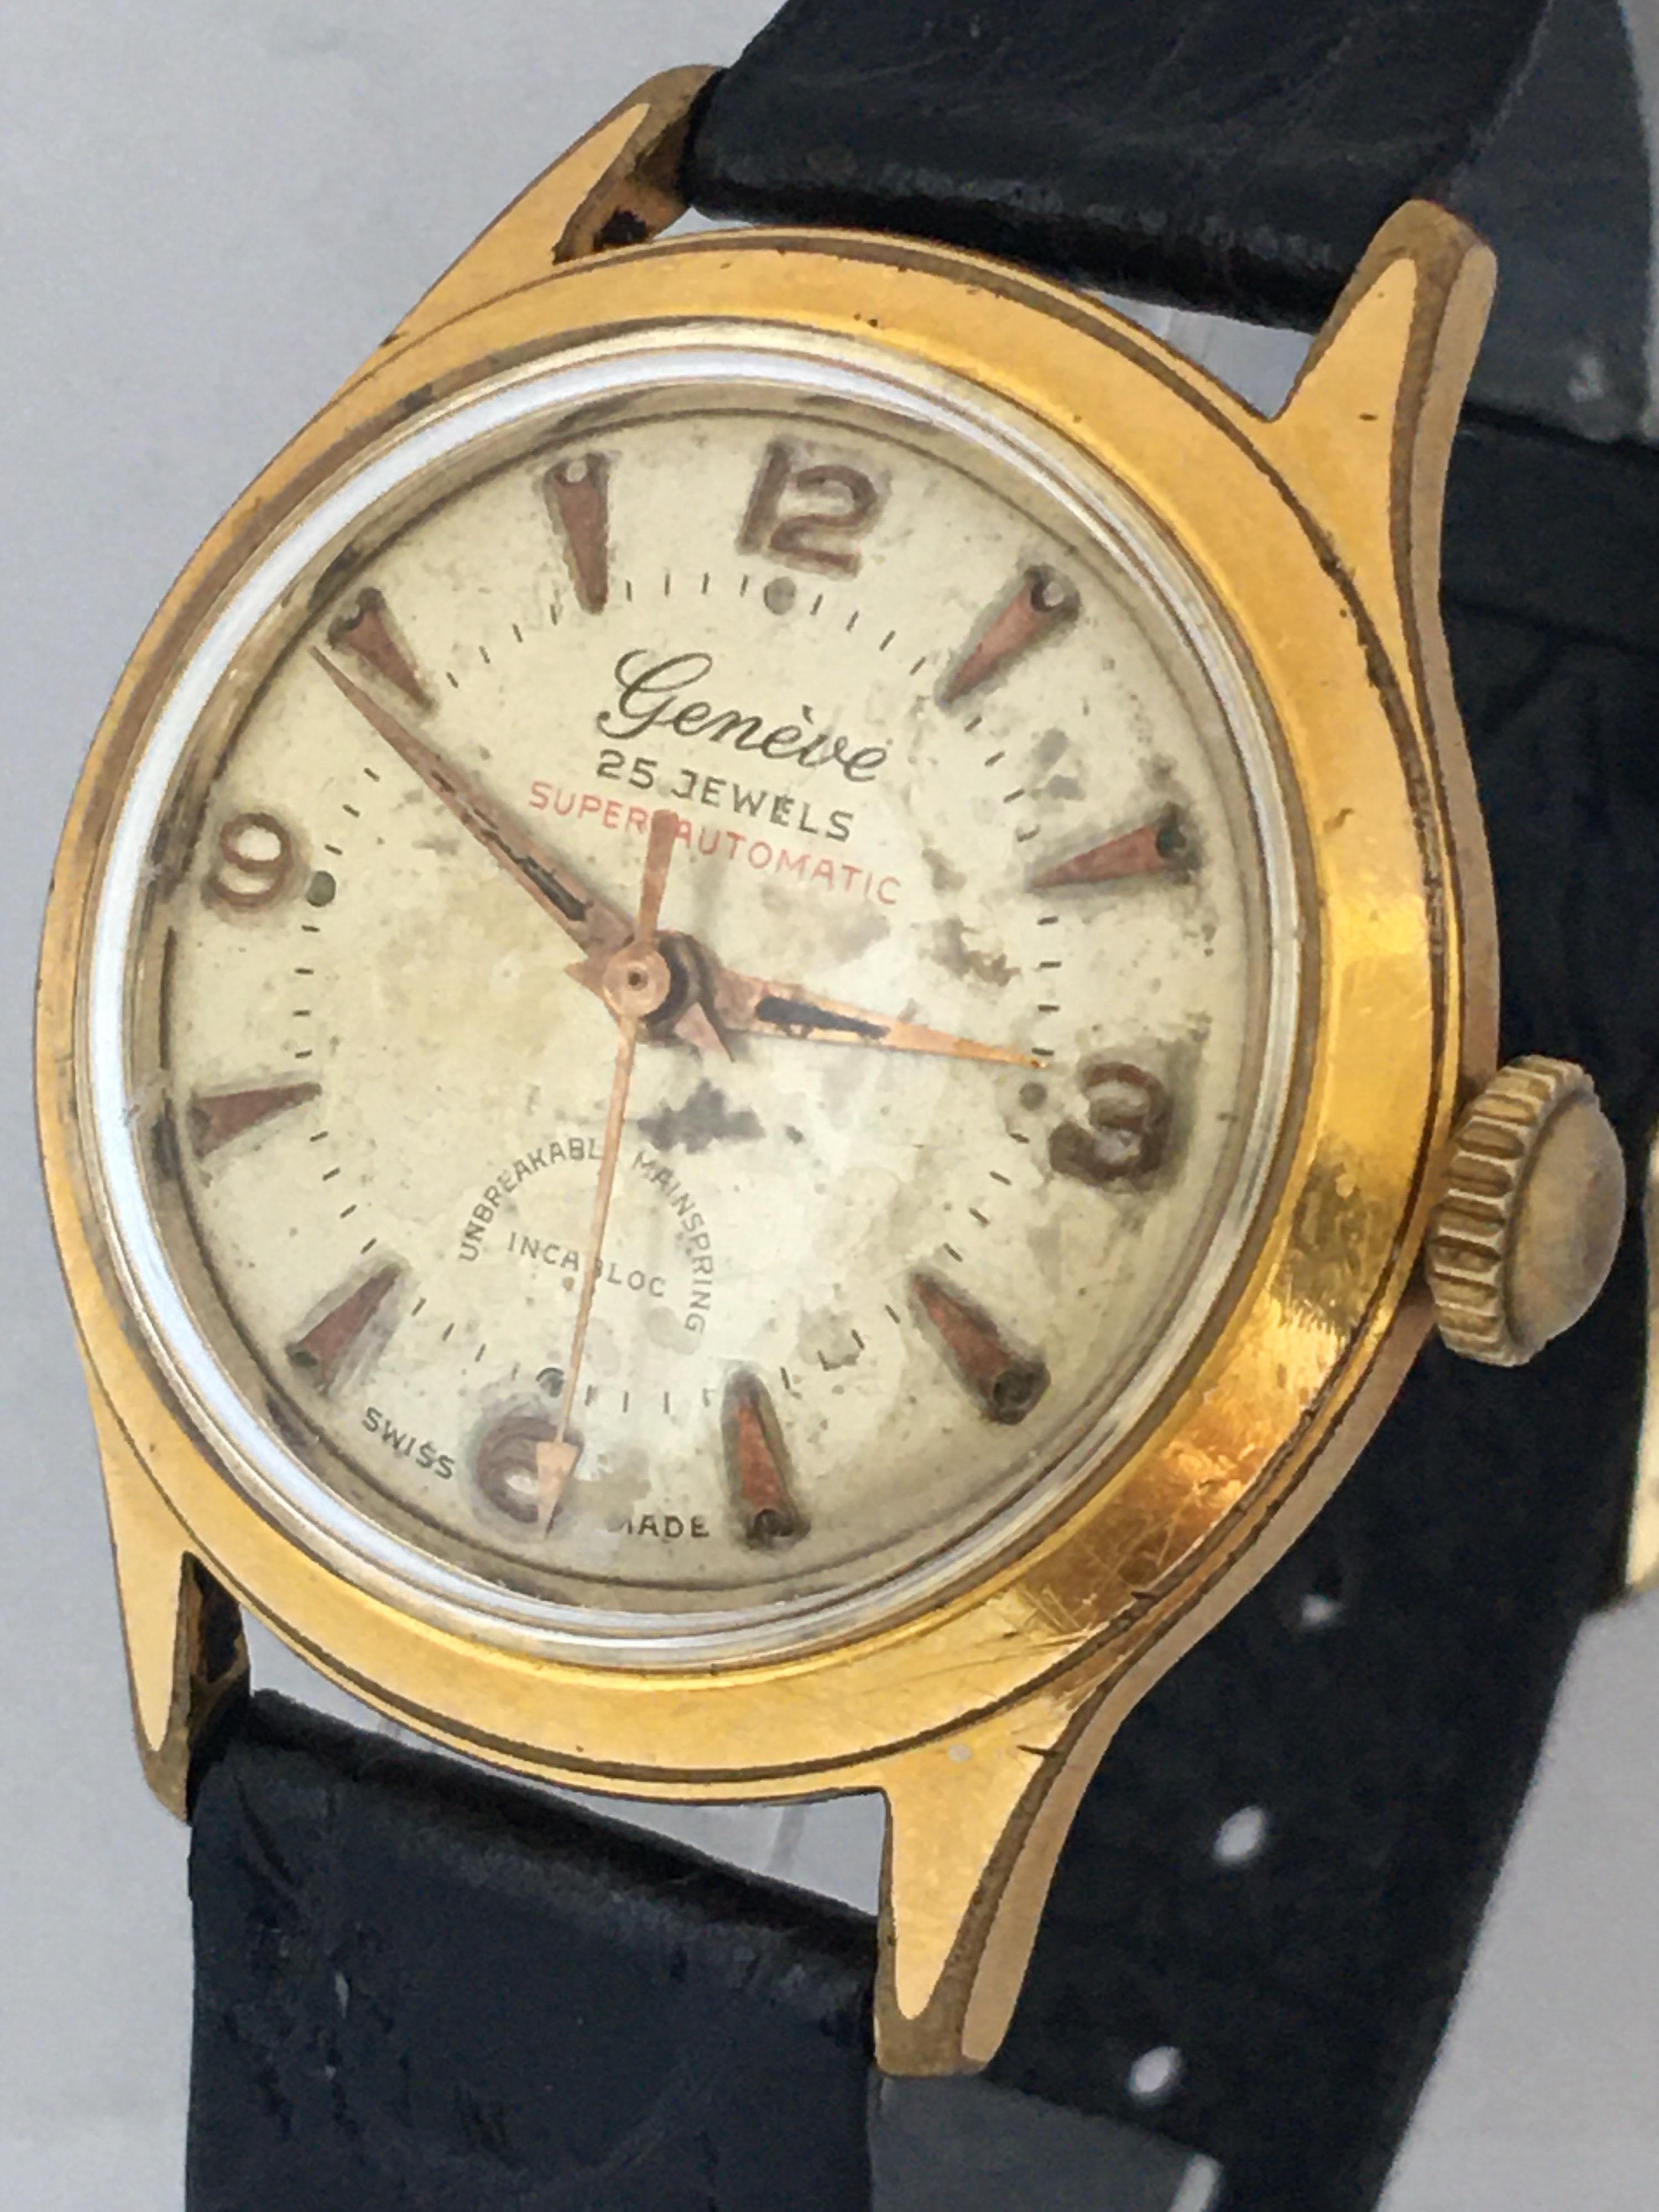 This beautiful pre-owned automatic watch is Working and it is running well. visible signs of ageing and wear with scratches on the staineledd steel back watch case. the dial is a bit worn as shown.

Please study the images carefully as form part of